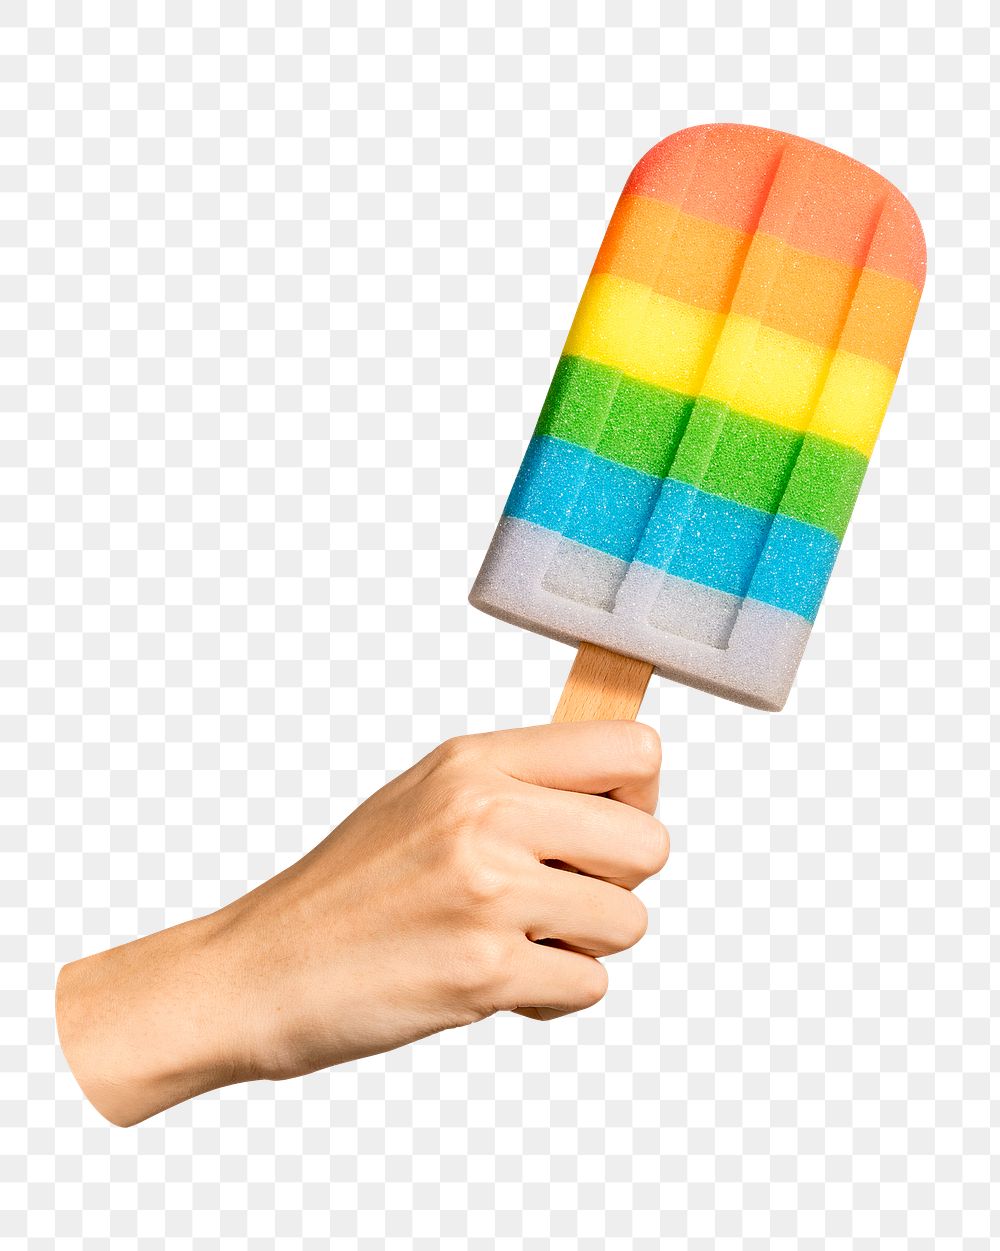 Rainbow popsicle png sticker, transparent background